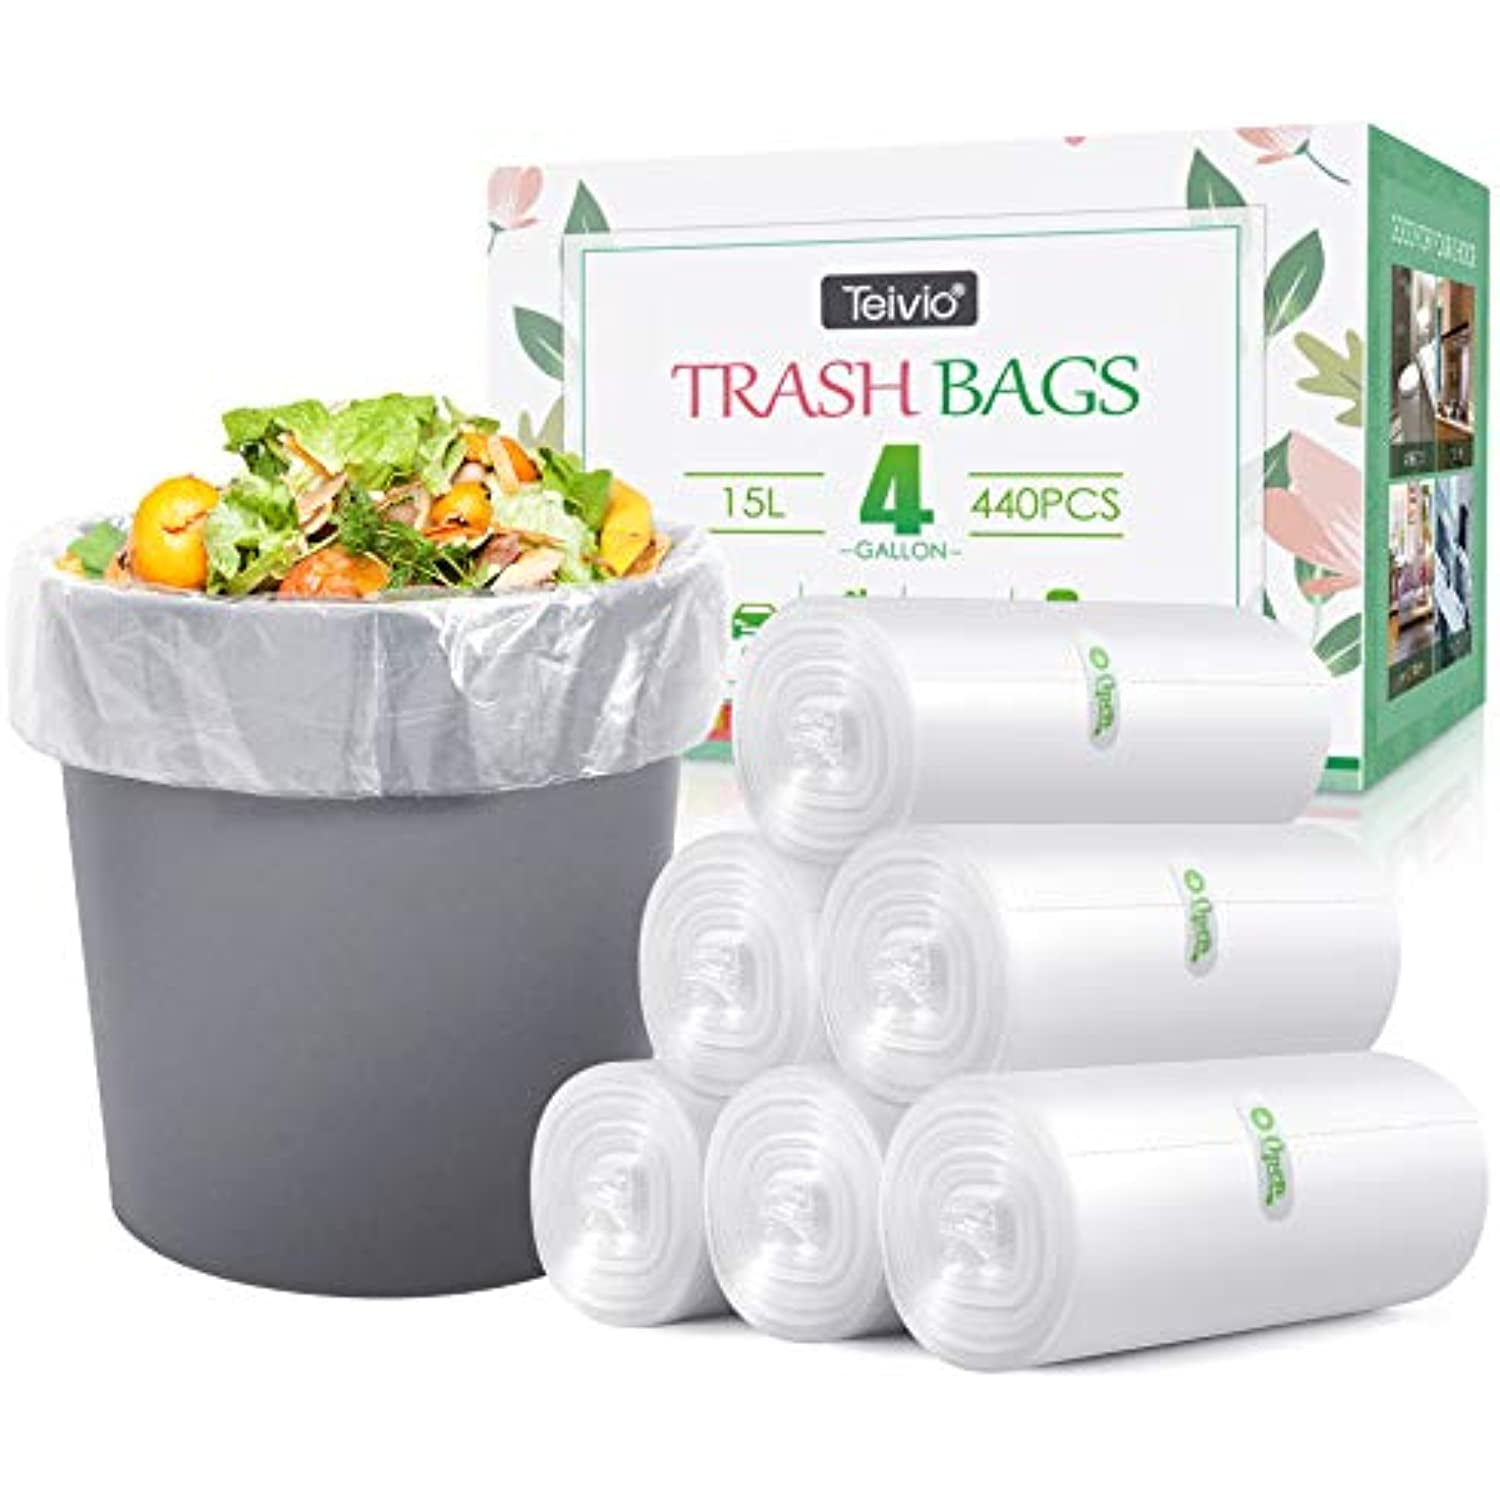 1.2 Gallon/330pcs Strong Trash Bags Colorful Clear Garbage Bags by Teivio,  Bathroom Trash Can Bin Liners, Small Plastic Bags for home office kitchen